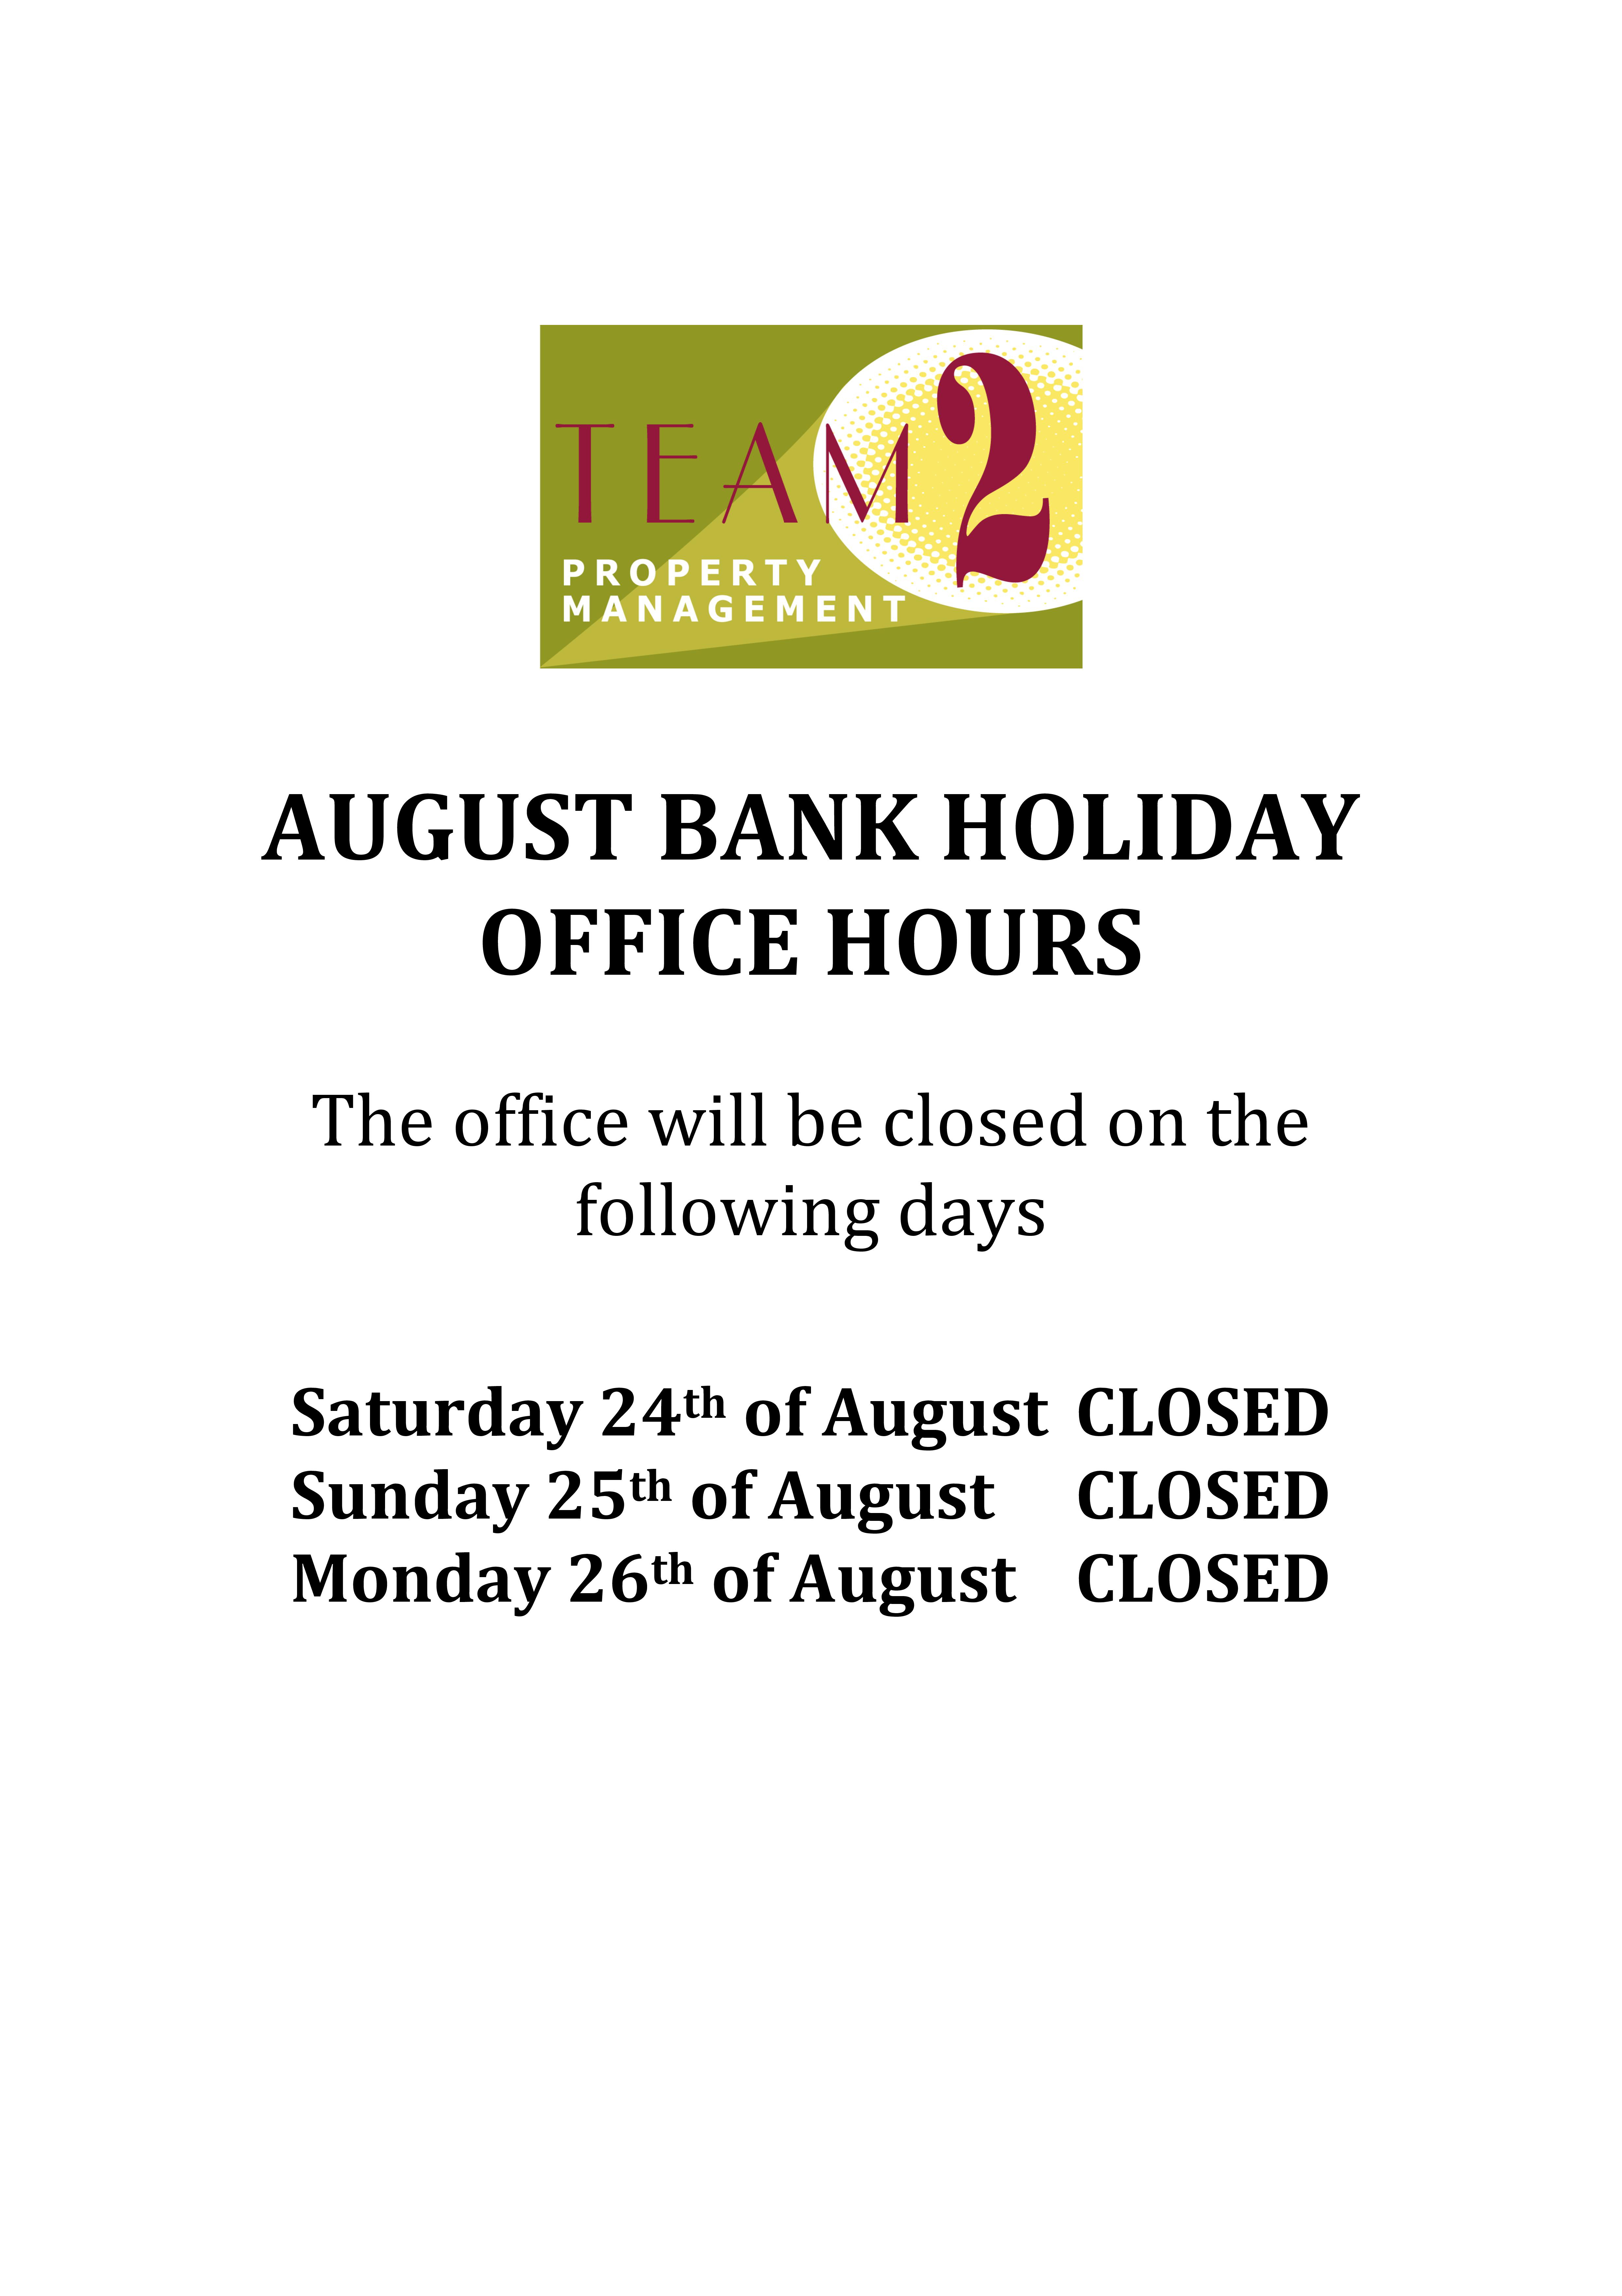 August Bank Holiday Hours